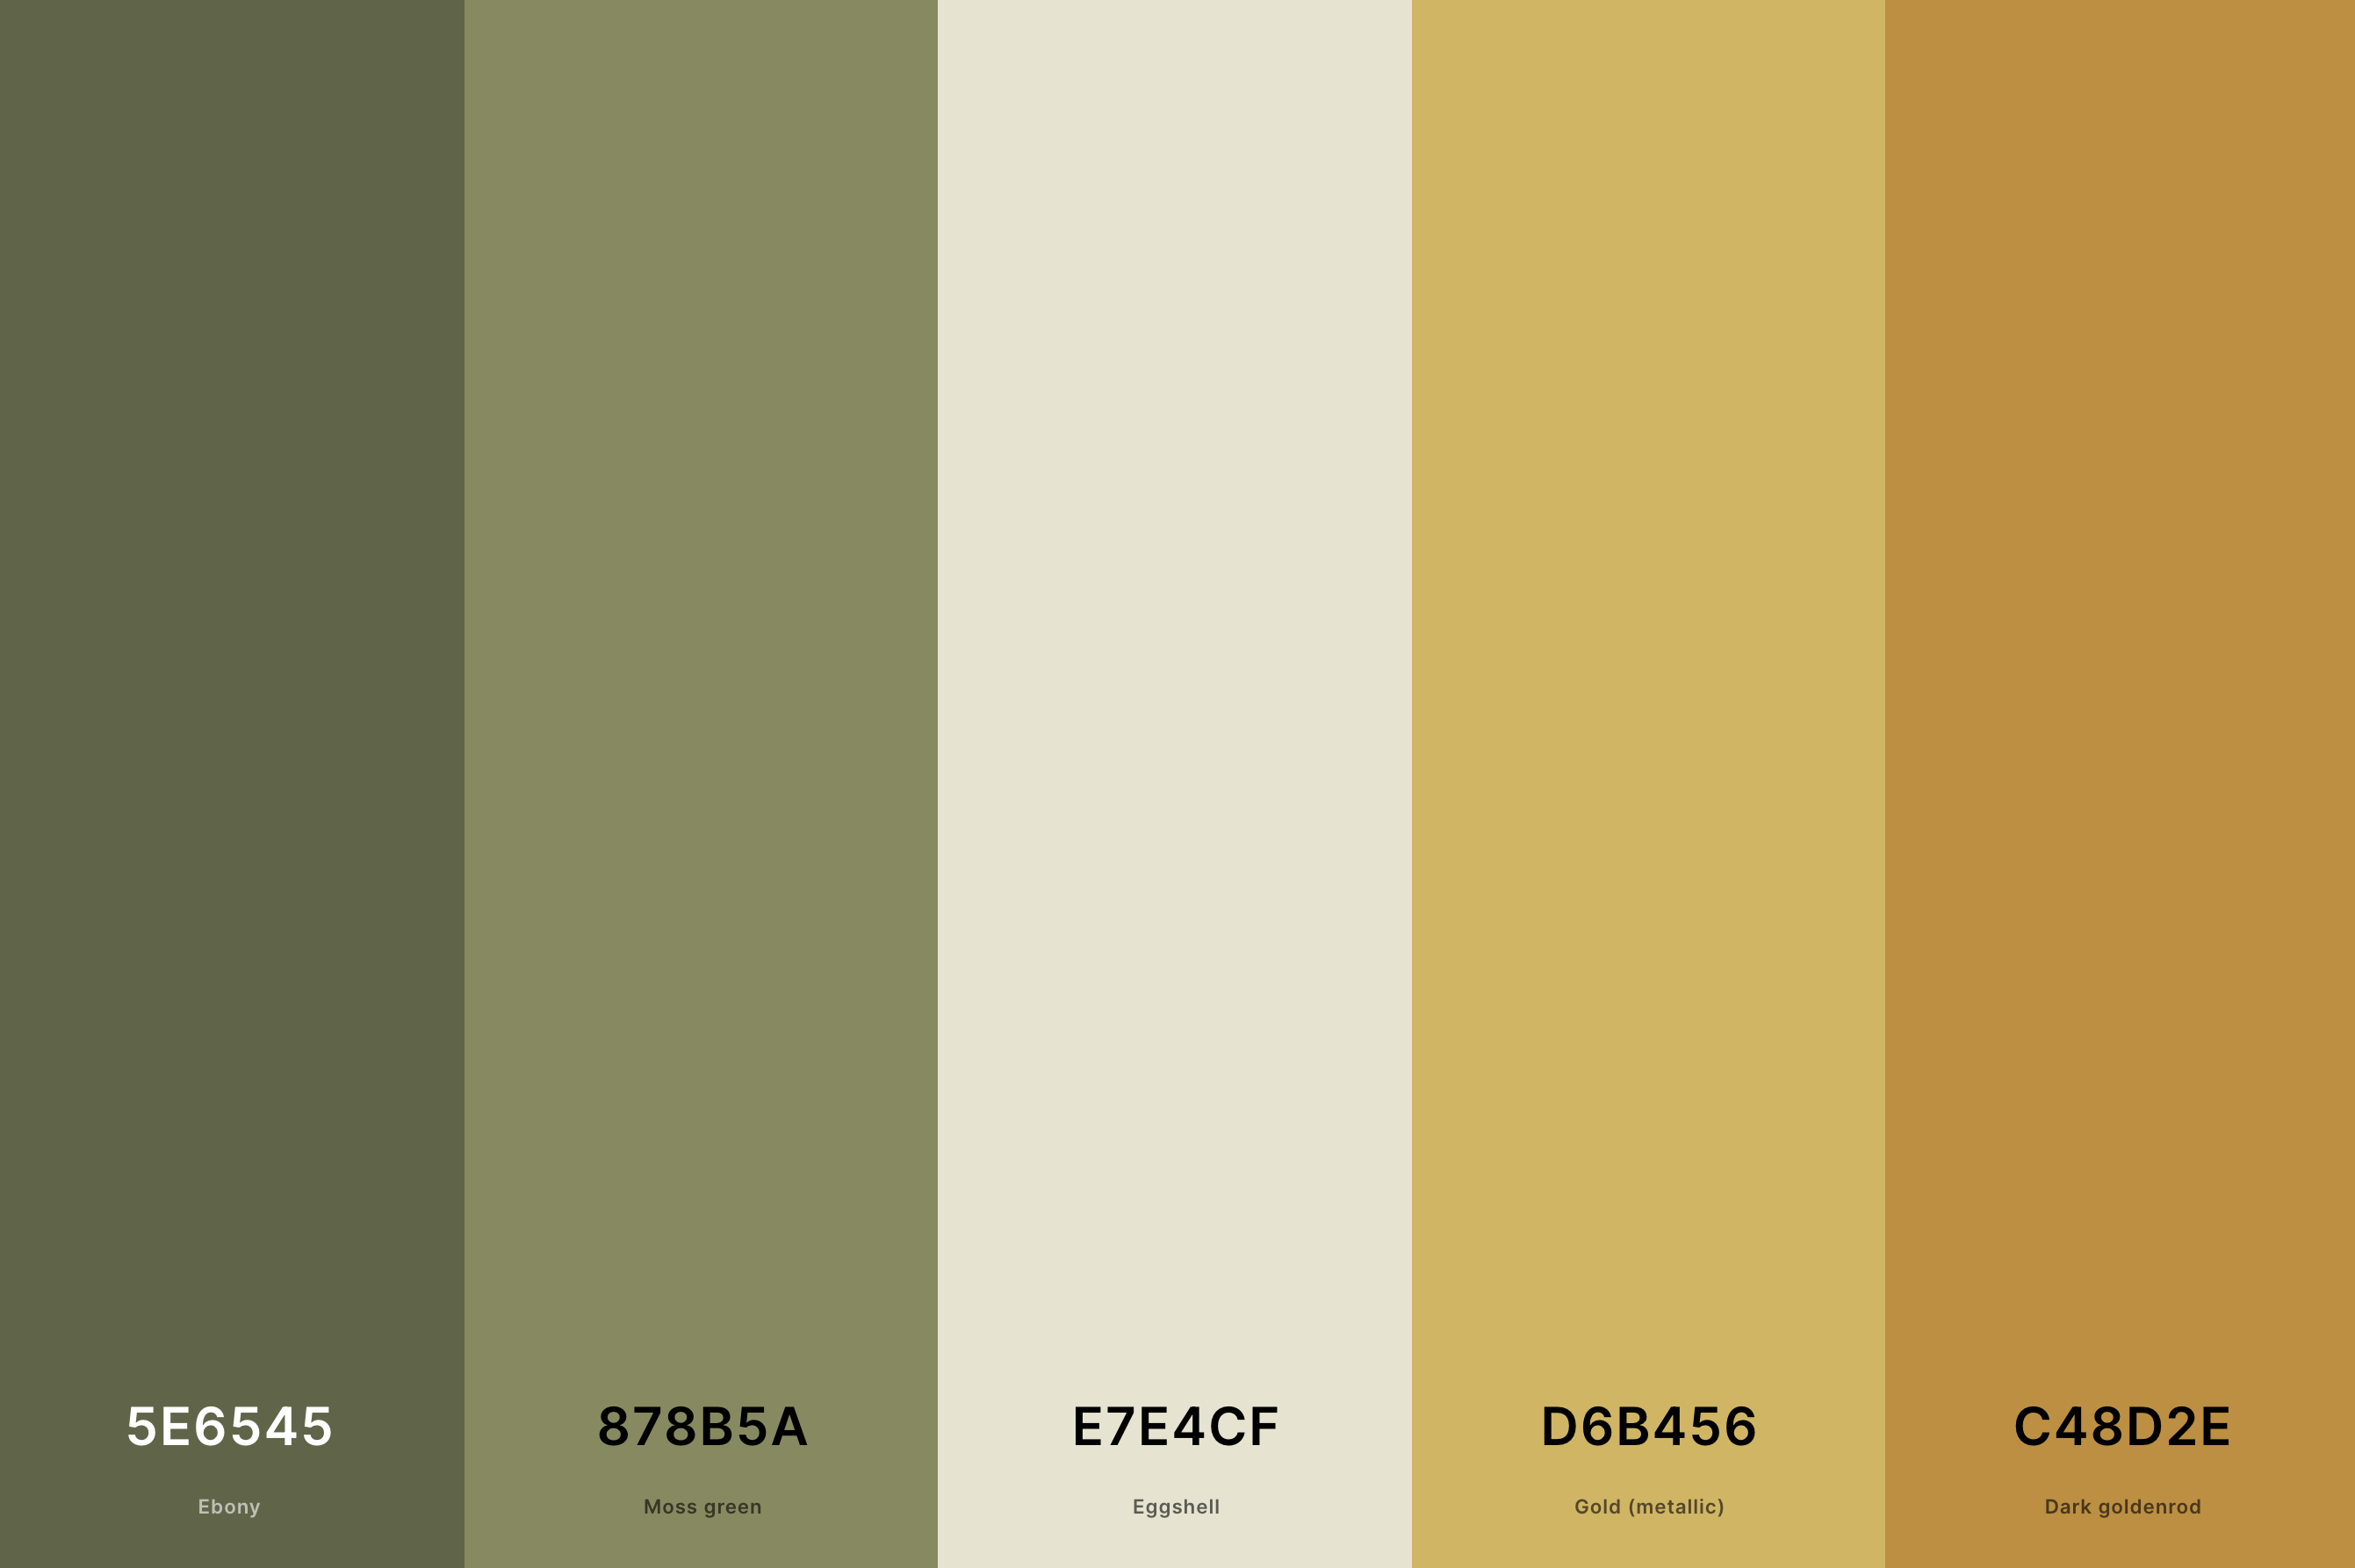 17. Sage Green And Gold Color Palette Color Palette with Ebony (Hex #5E6545) + Moss Green (Hex #878B5A) + Eggshell (Hex #E7E4CF) + Gold (Metallic) (Hex #D6B456) + Dark Goldenrod (Hex #C48D2E) Color Palette with Hex Codes